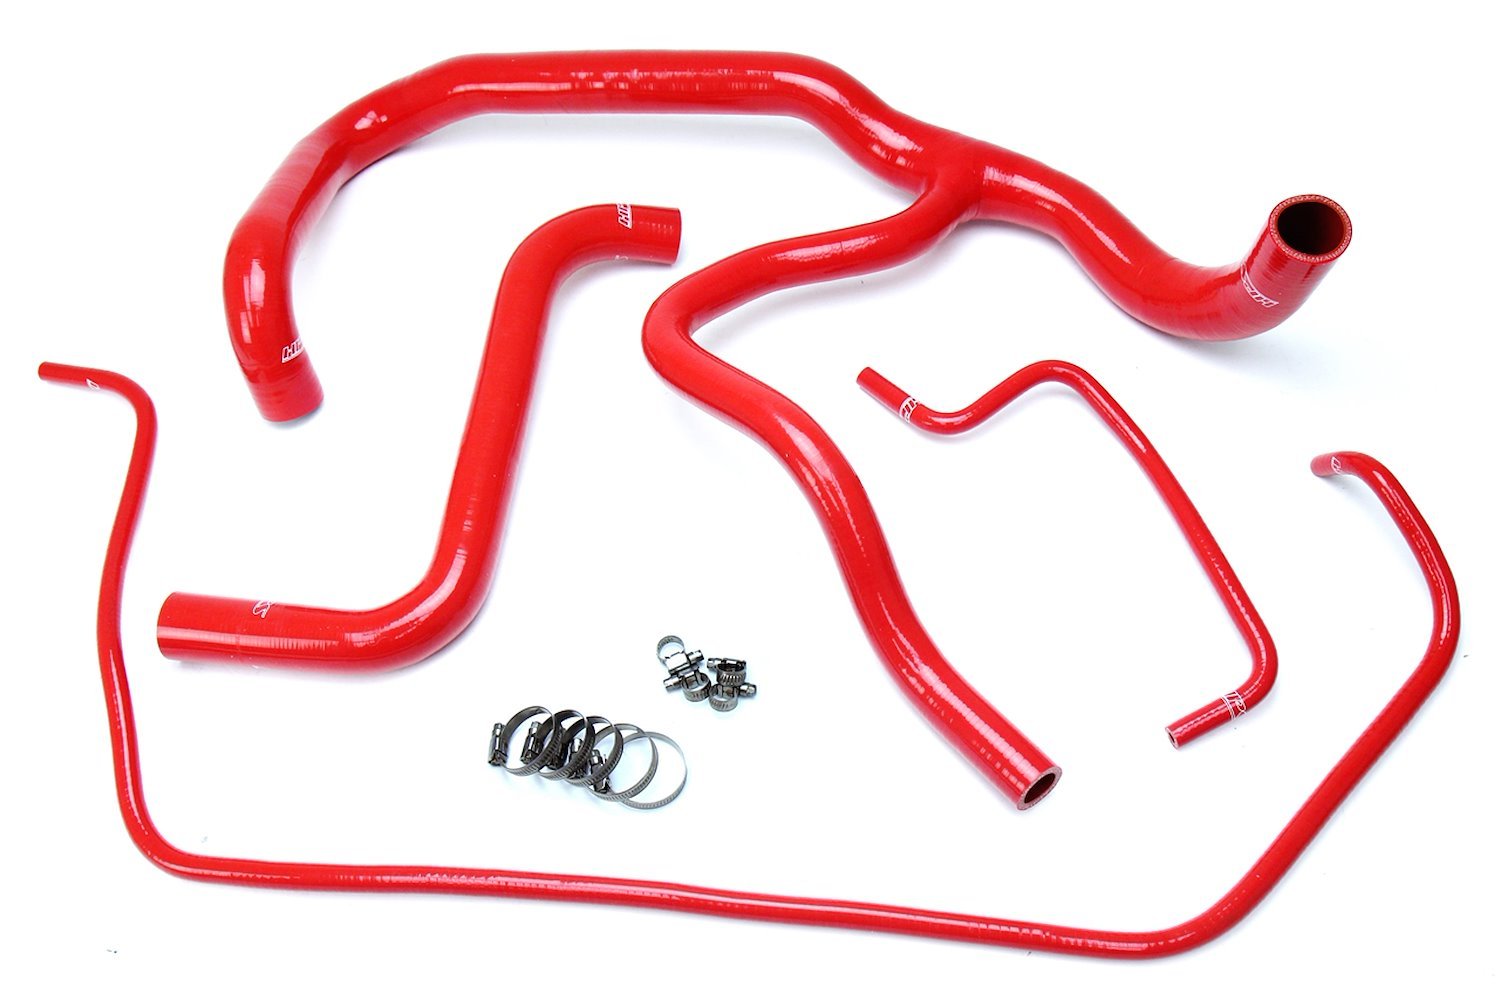 57-1594R-RED Radiator Hose Kit, High-Temp 3-Ply Reinforced Silicone, Replace OEM Rubber Radiator Coolant Hoses